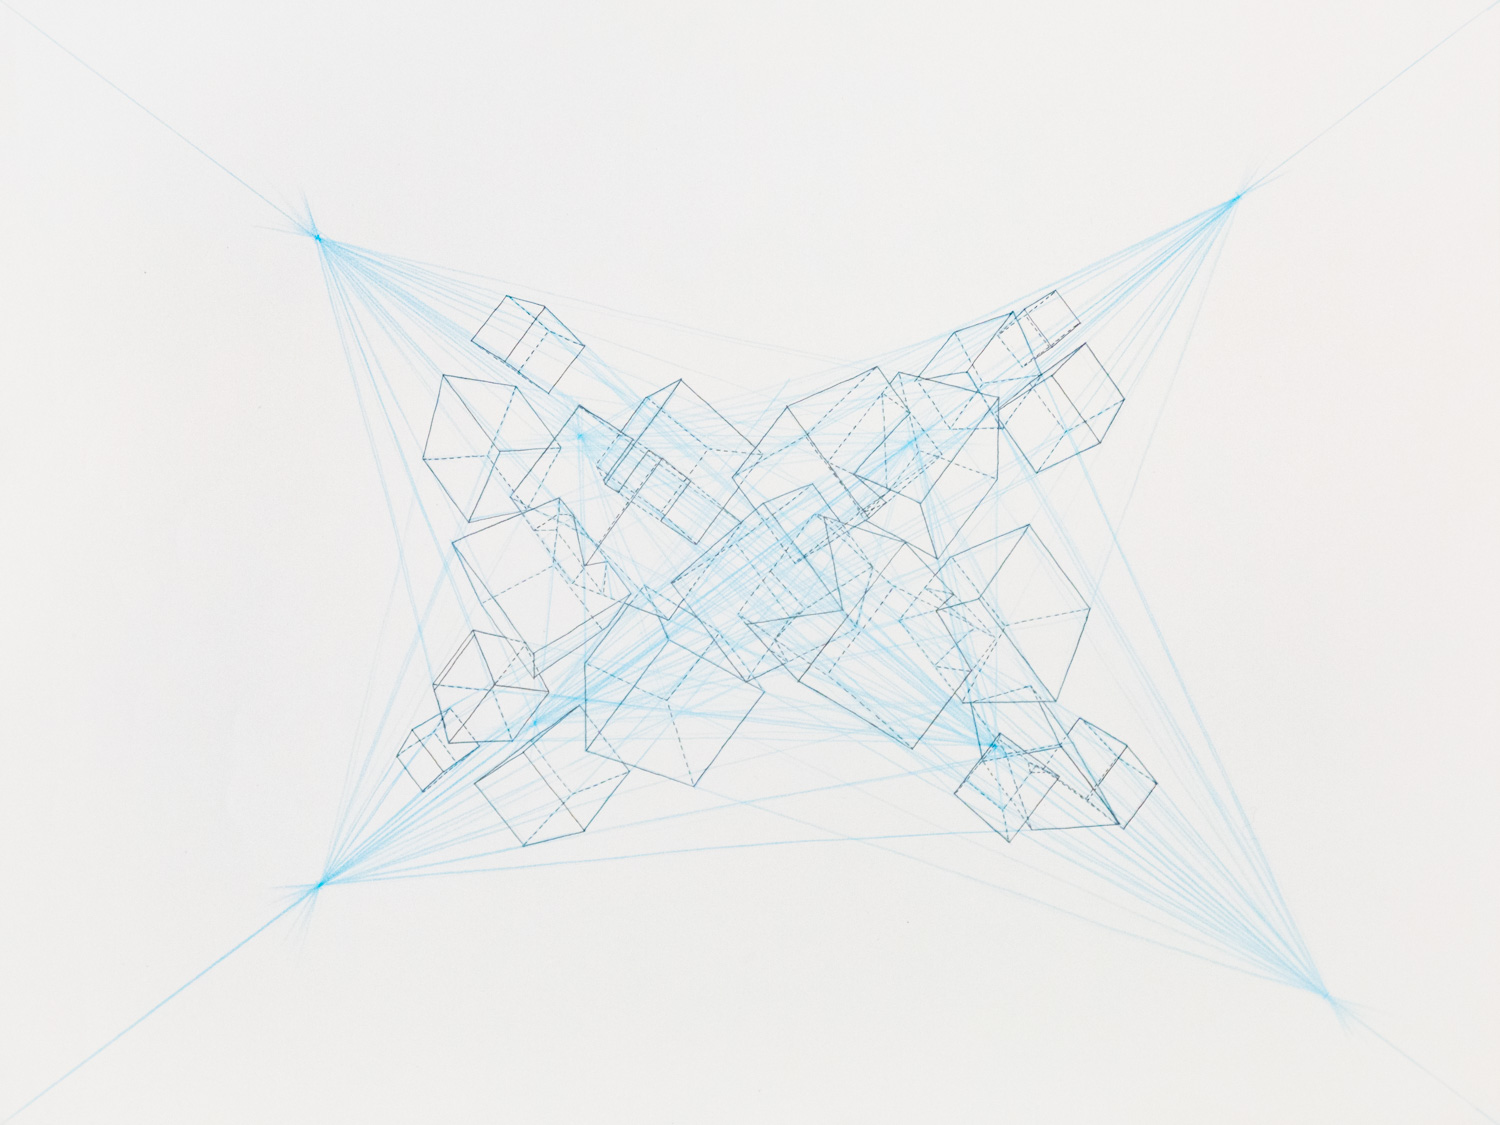 Line drawing of cubes intersecting each other.